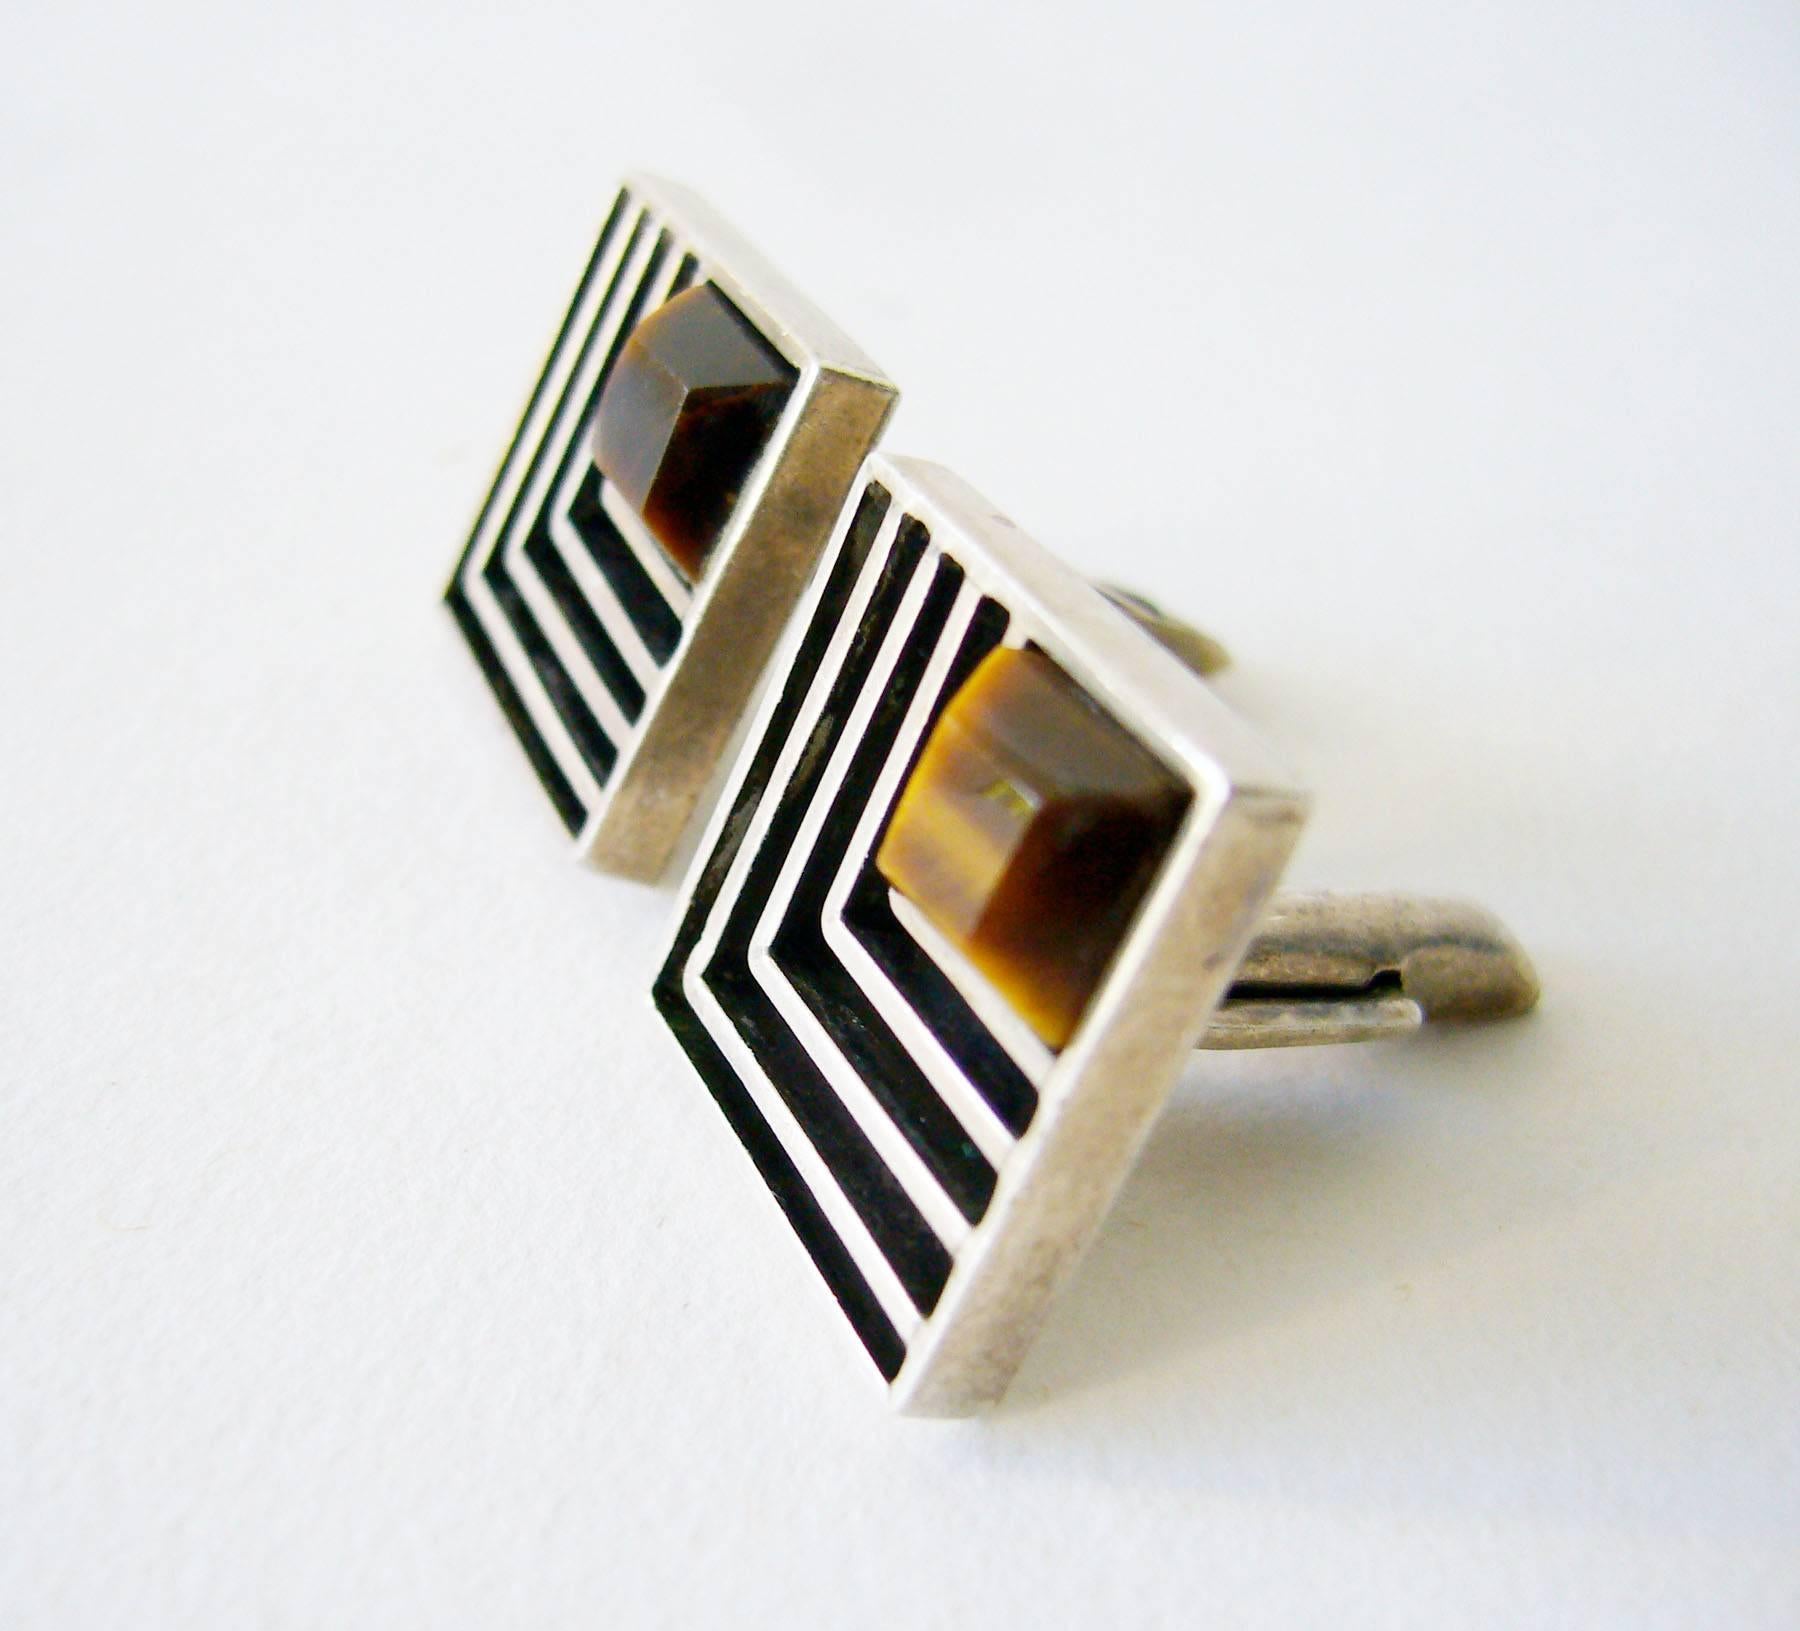 Mexican sterling silver and tiger's eye geometric modernist cufflinks created by Cecilia Toño circa 1960.  Cufflinks measure .75" by .75" and feature faceted square tiger eye stones.  Signed Toño on verso and in very good vintage